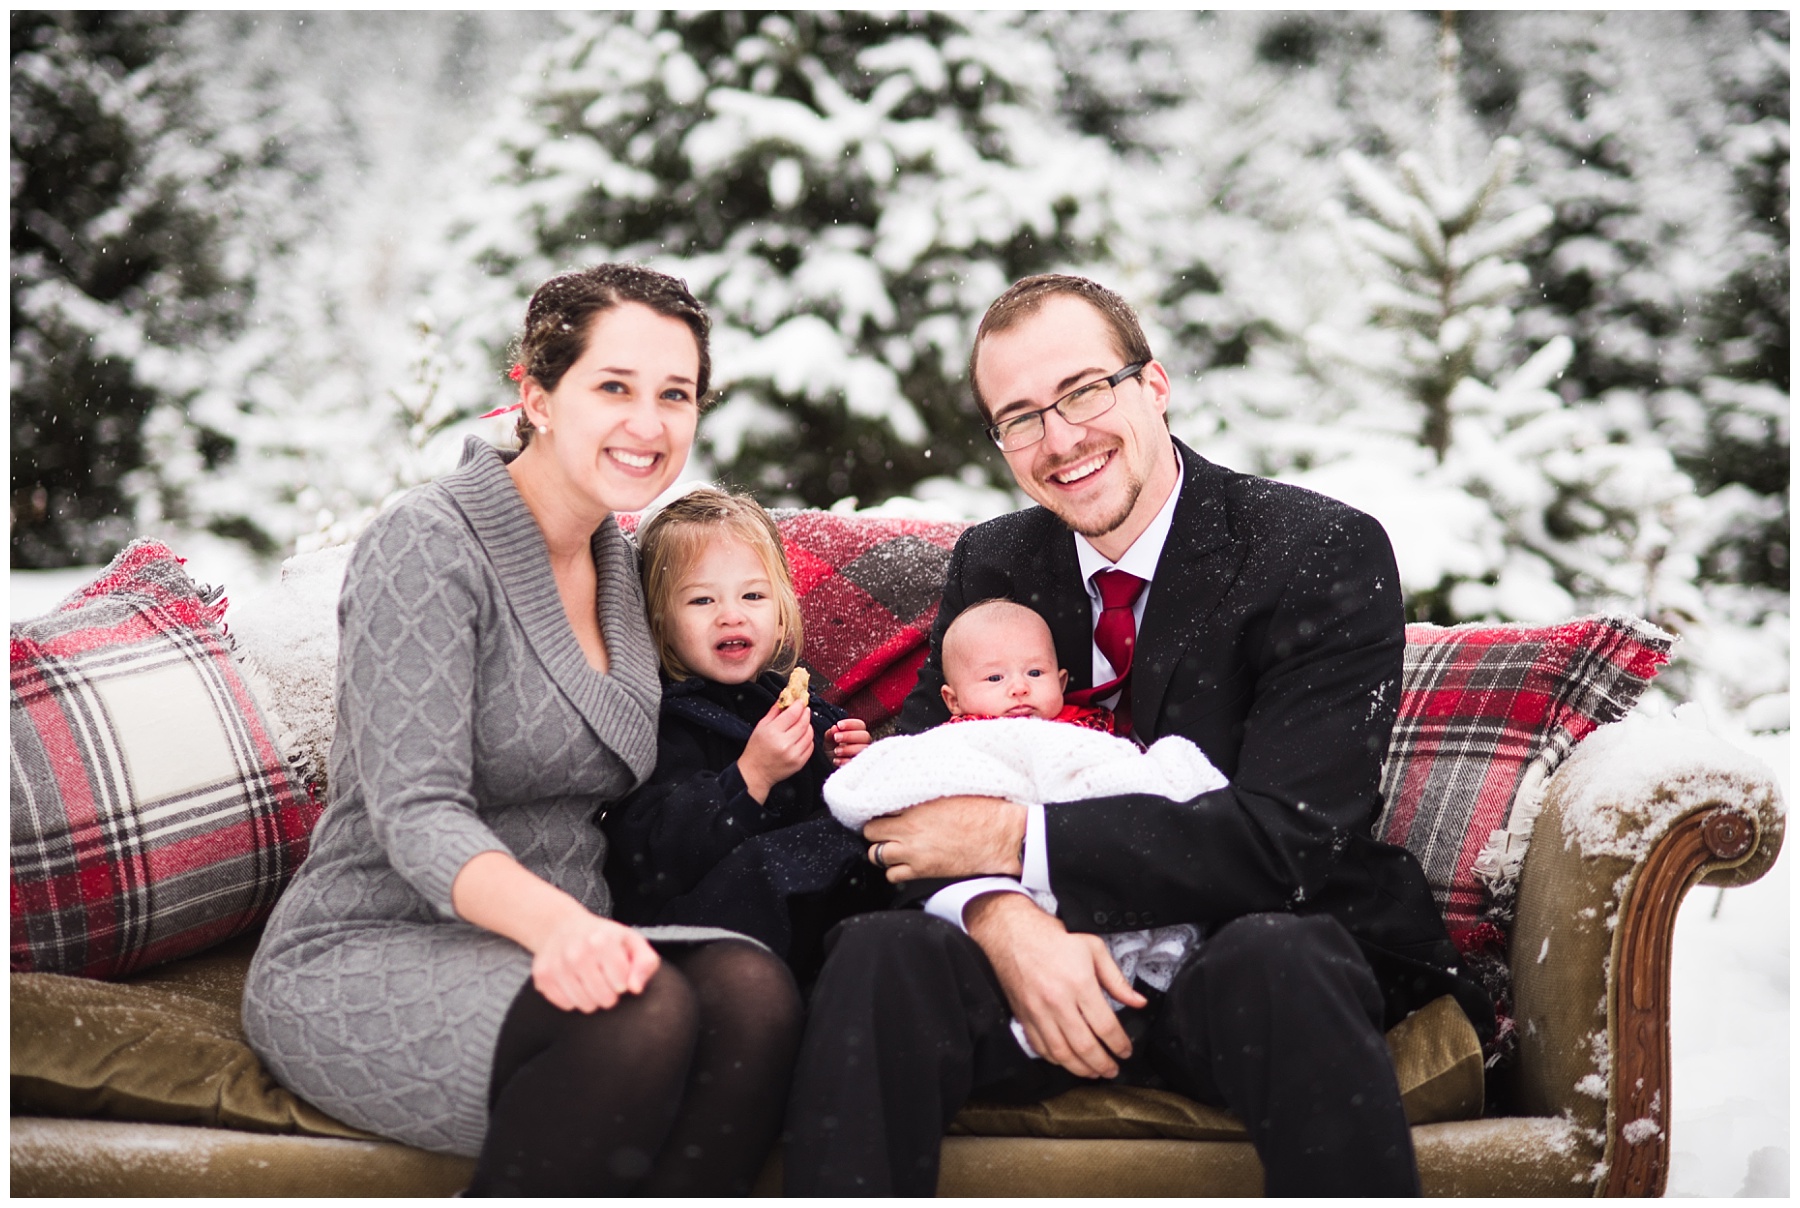 Samantha Ludlow Photography, Merry Christmas from the Ludlows, Syracuse photographer